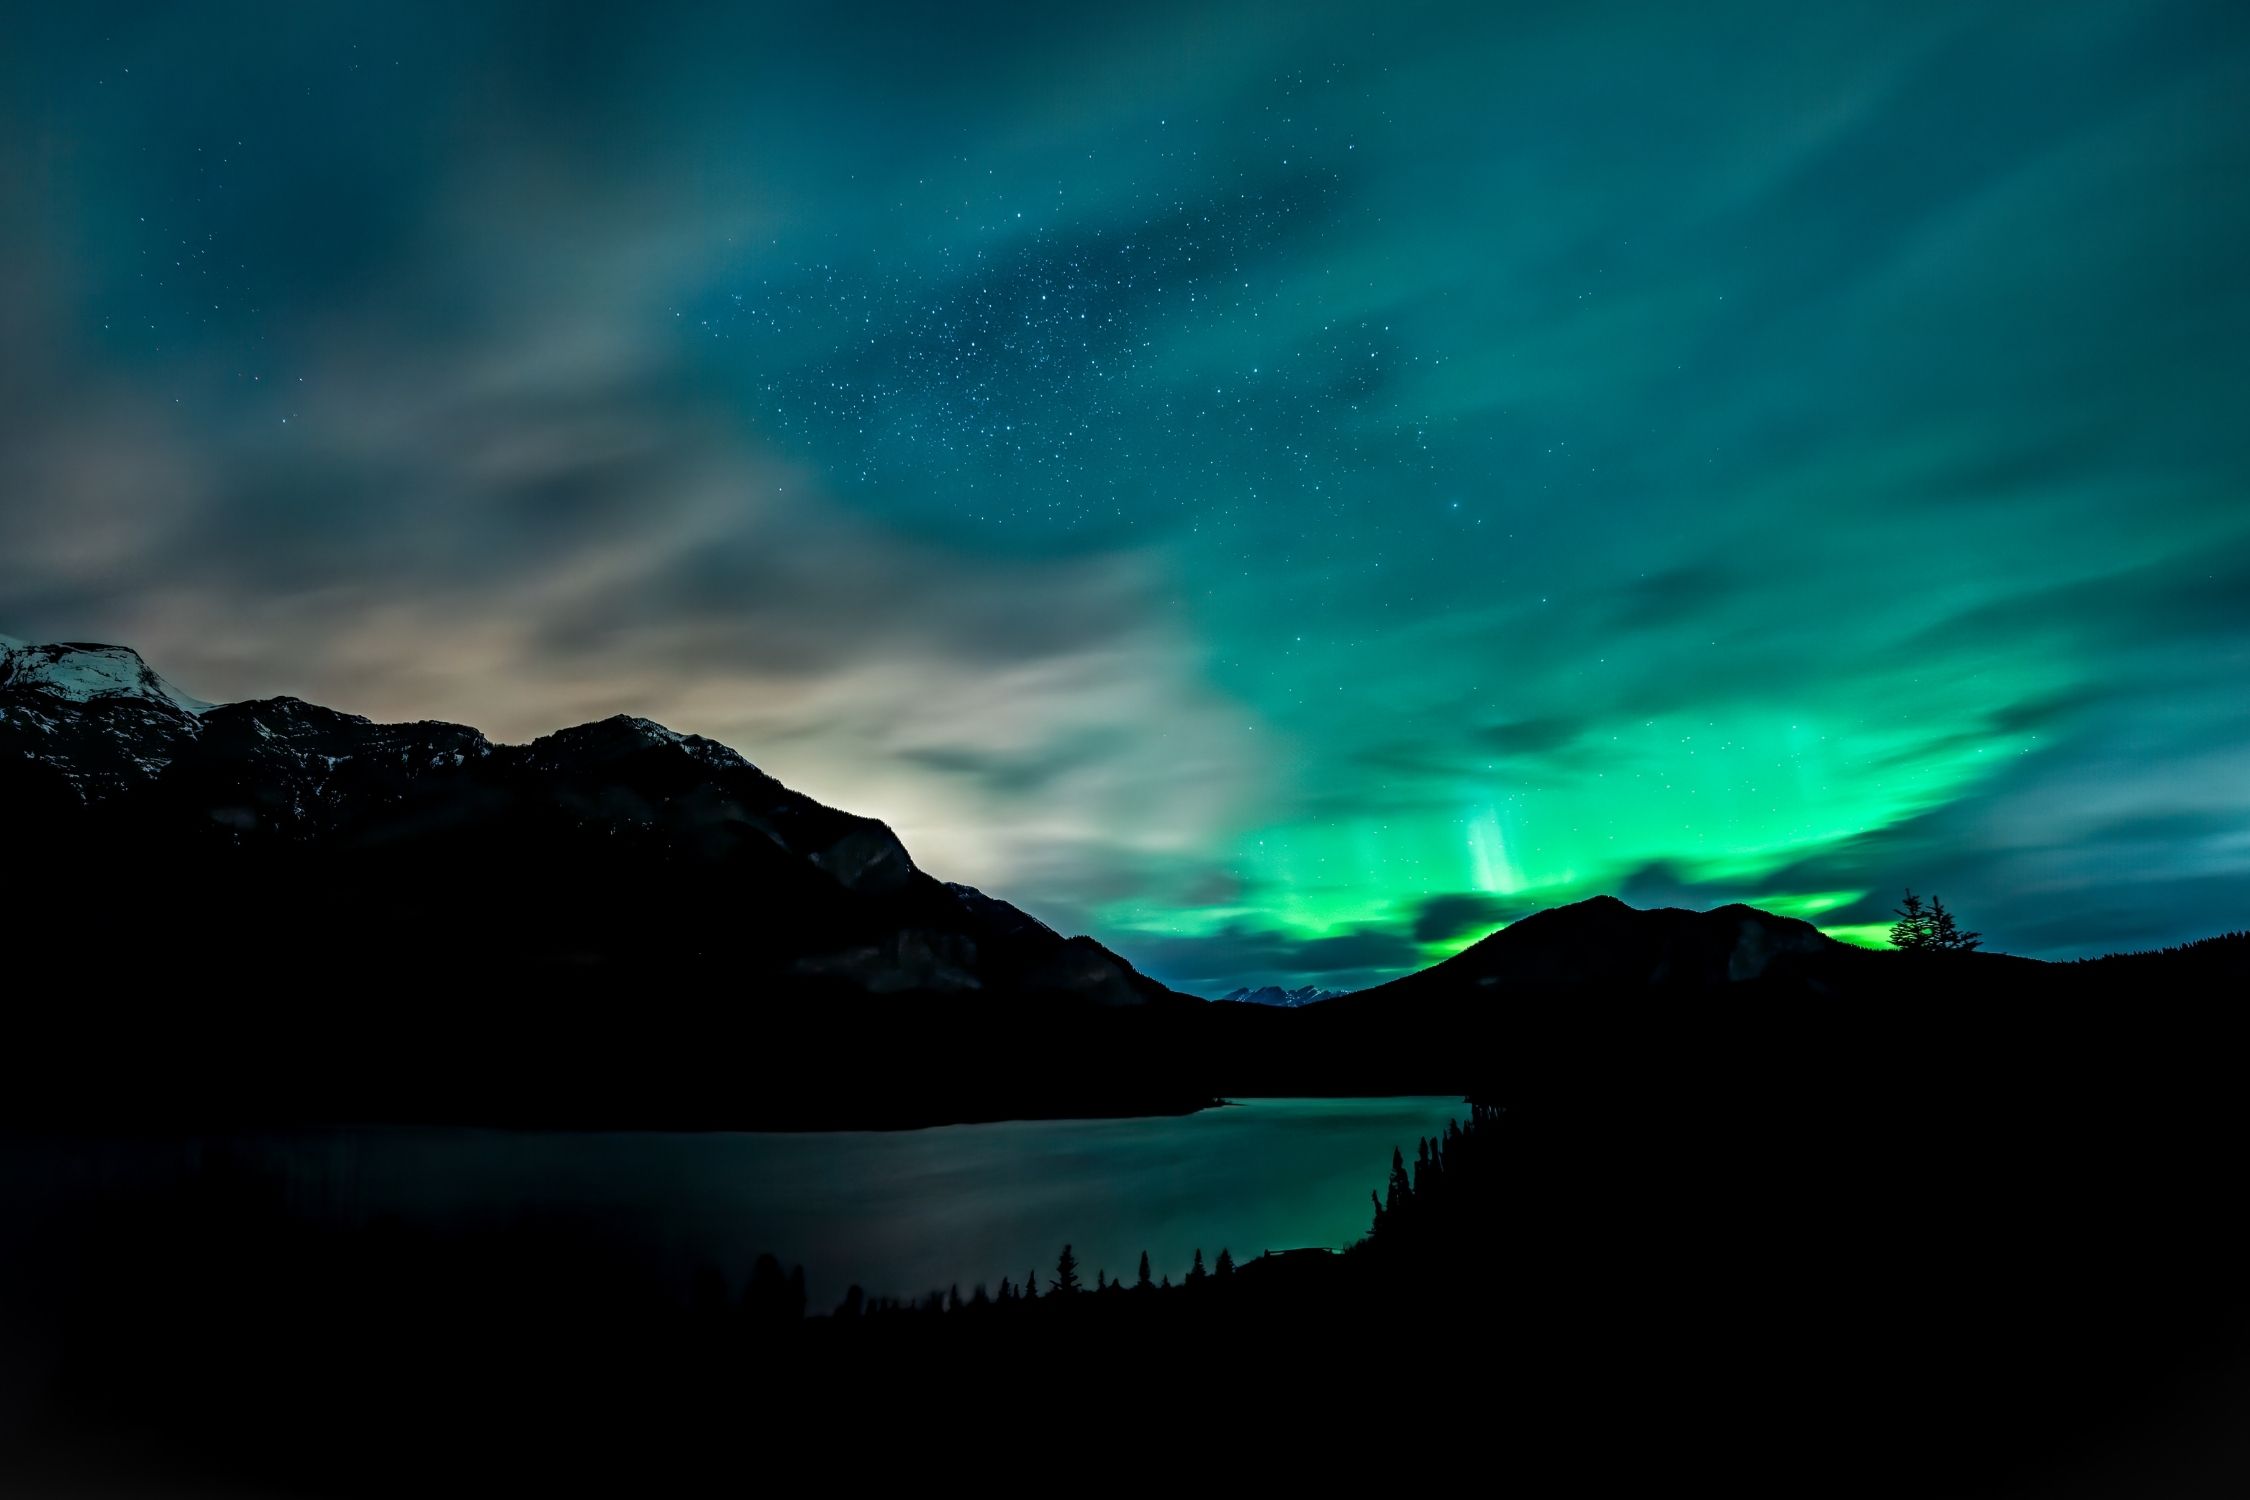 The Northern Lights in Banff over Peyto Lake